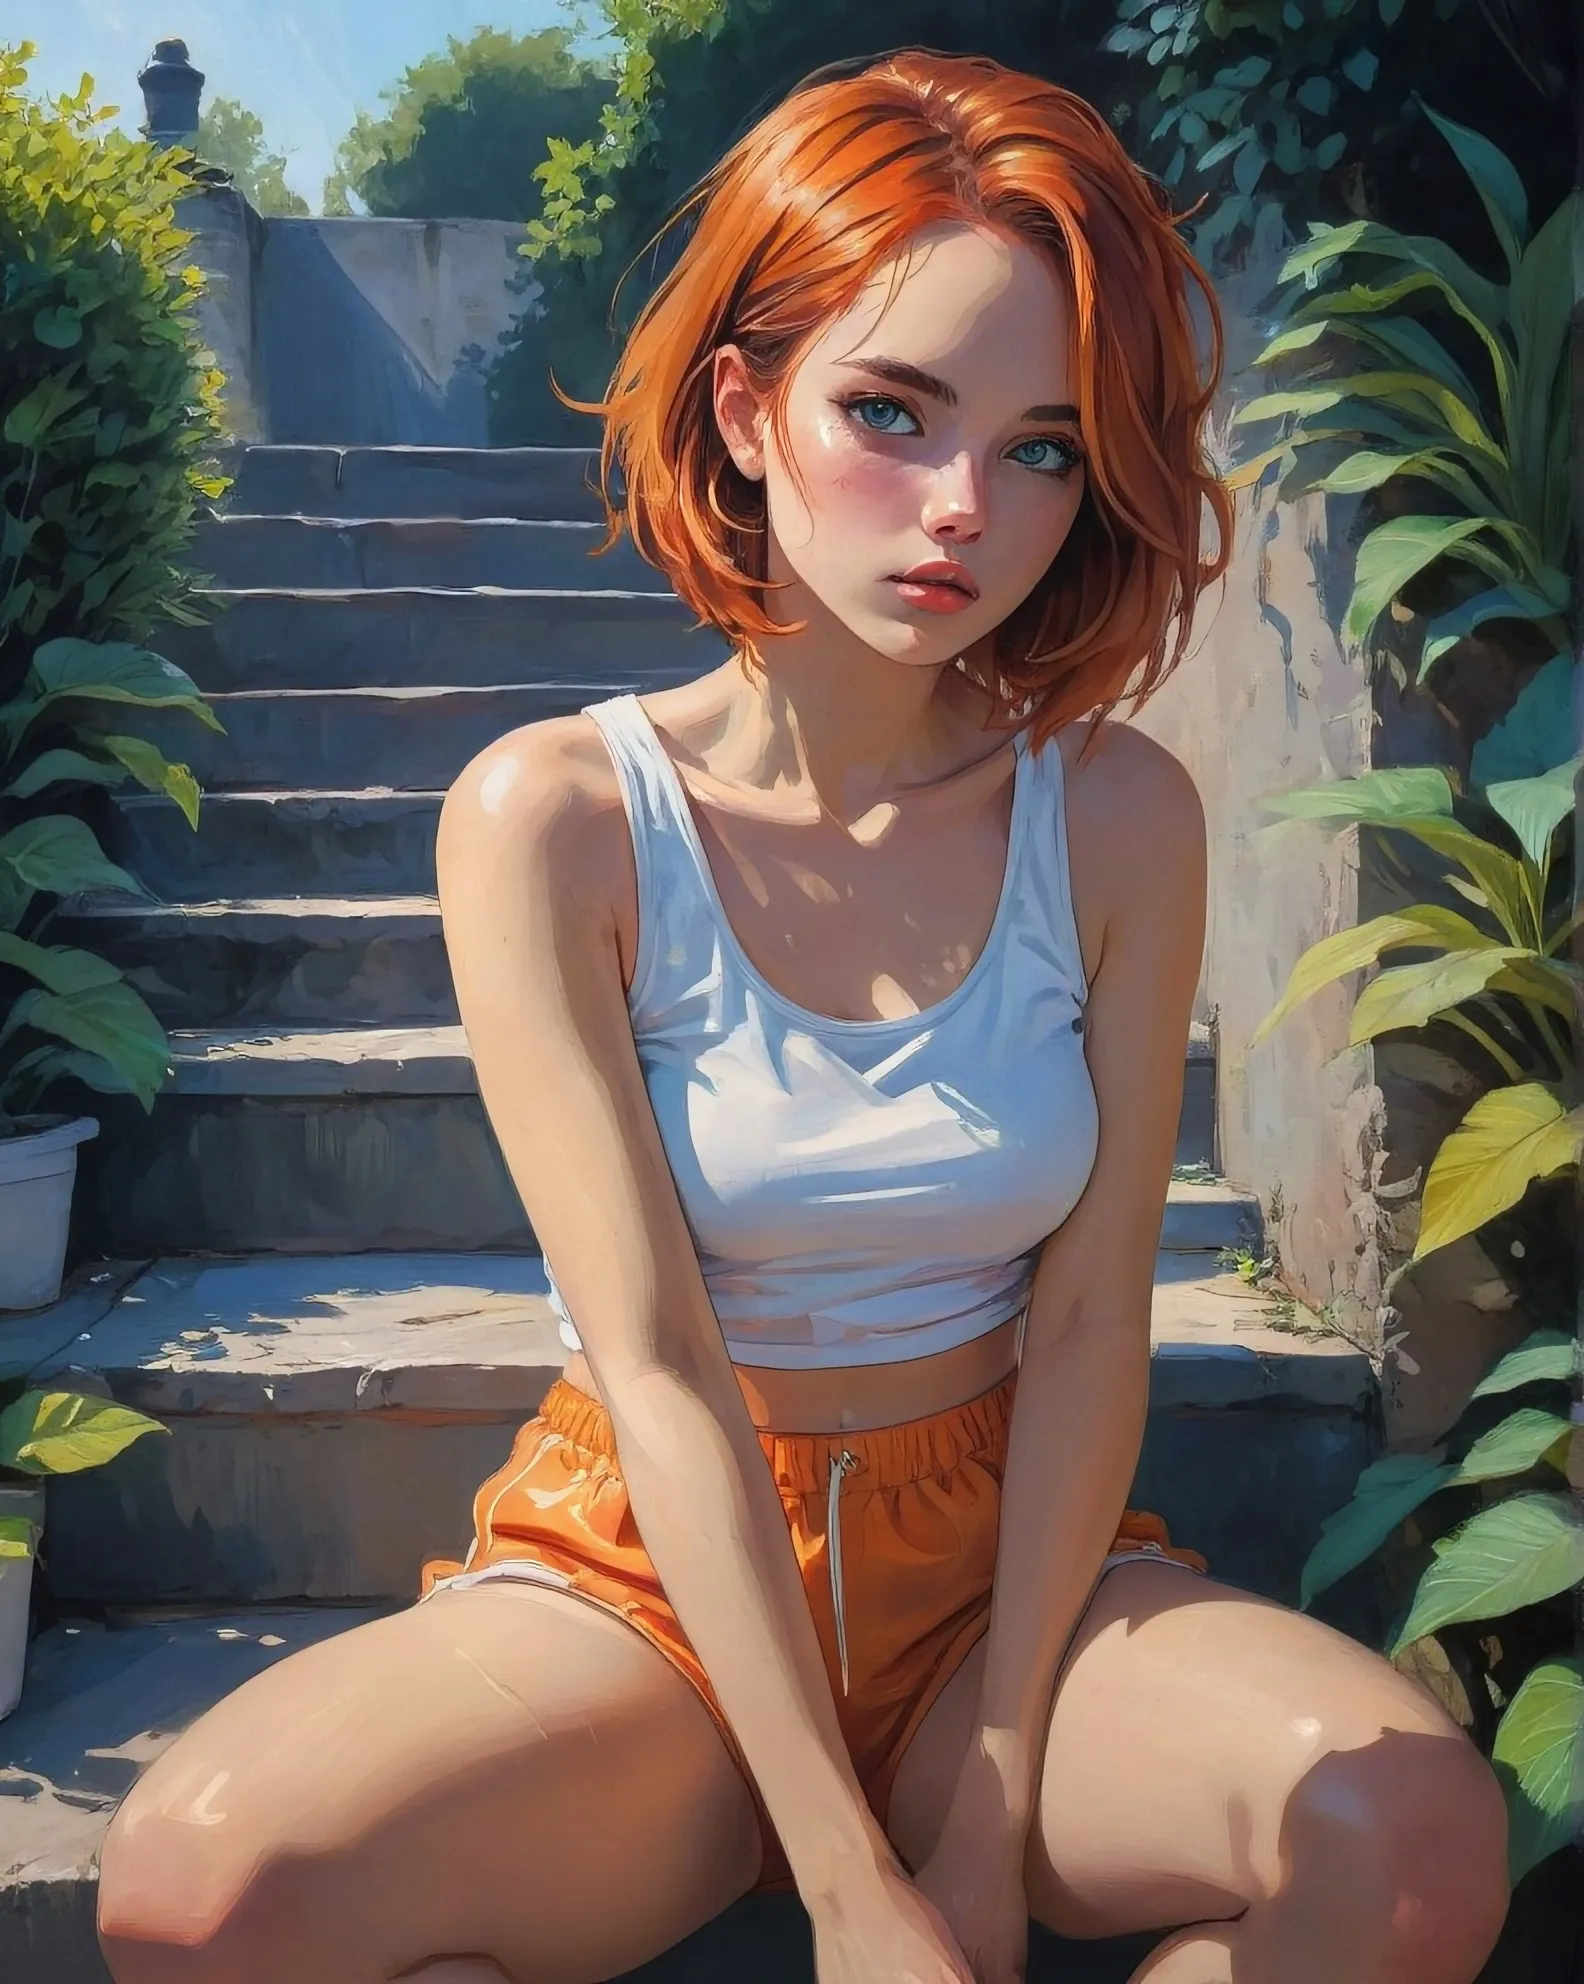 Gorgeous young woman with reddish orange hair in a bob style, sitting on a step in a garden, wearing a white tank top and short orange shorts, sapphire blue eyes, Eiza Gonzalez, Abstract Fashion, Stunning, Stylish Cinematic Composition, Dynamic Posing, Gorgeous messy long colorful Hairstyle, Mysterious, Dynamic Lighting, Volumetric Lighting, Intense Backlighting, Shadows, Chiaroscuro, Tenebrism, Penumbra, Dramatic Staging, Monochromatic, tan Accents, Cel Shading, Toon Shading, Rotoscoping, Fresco, Oil On Canvas, Pastels, Acrylic On Canvas, Watercolor & Ink, Matte Finish